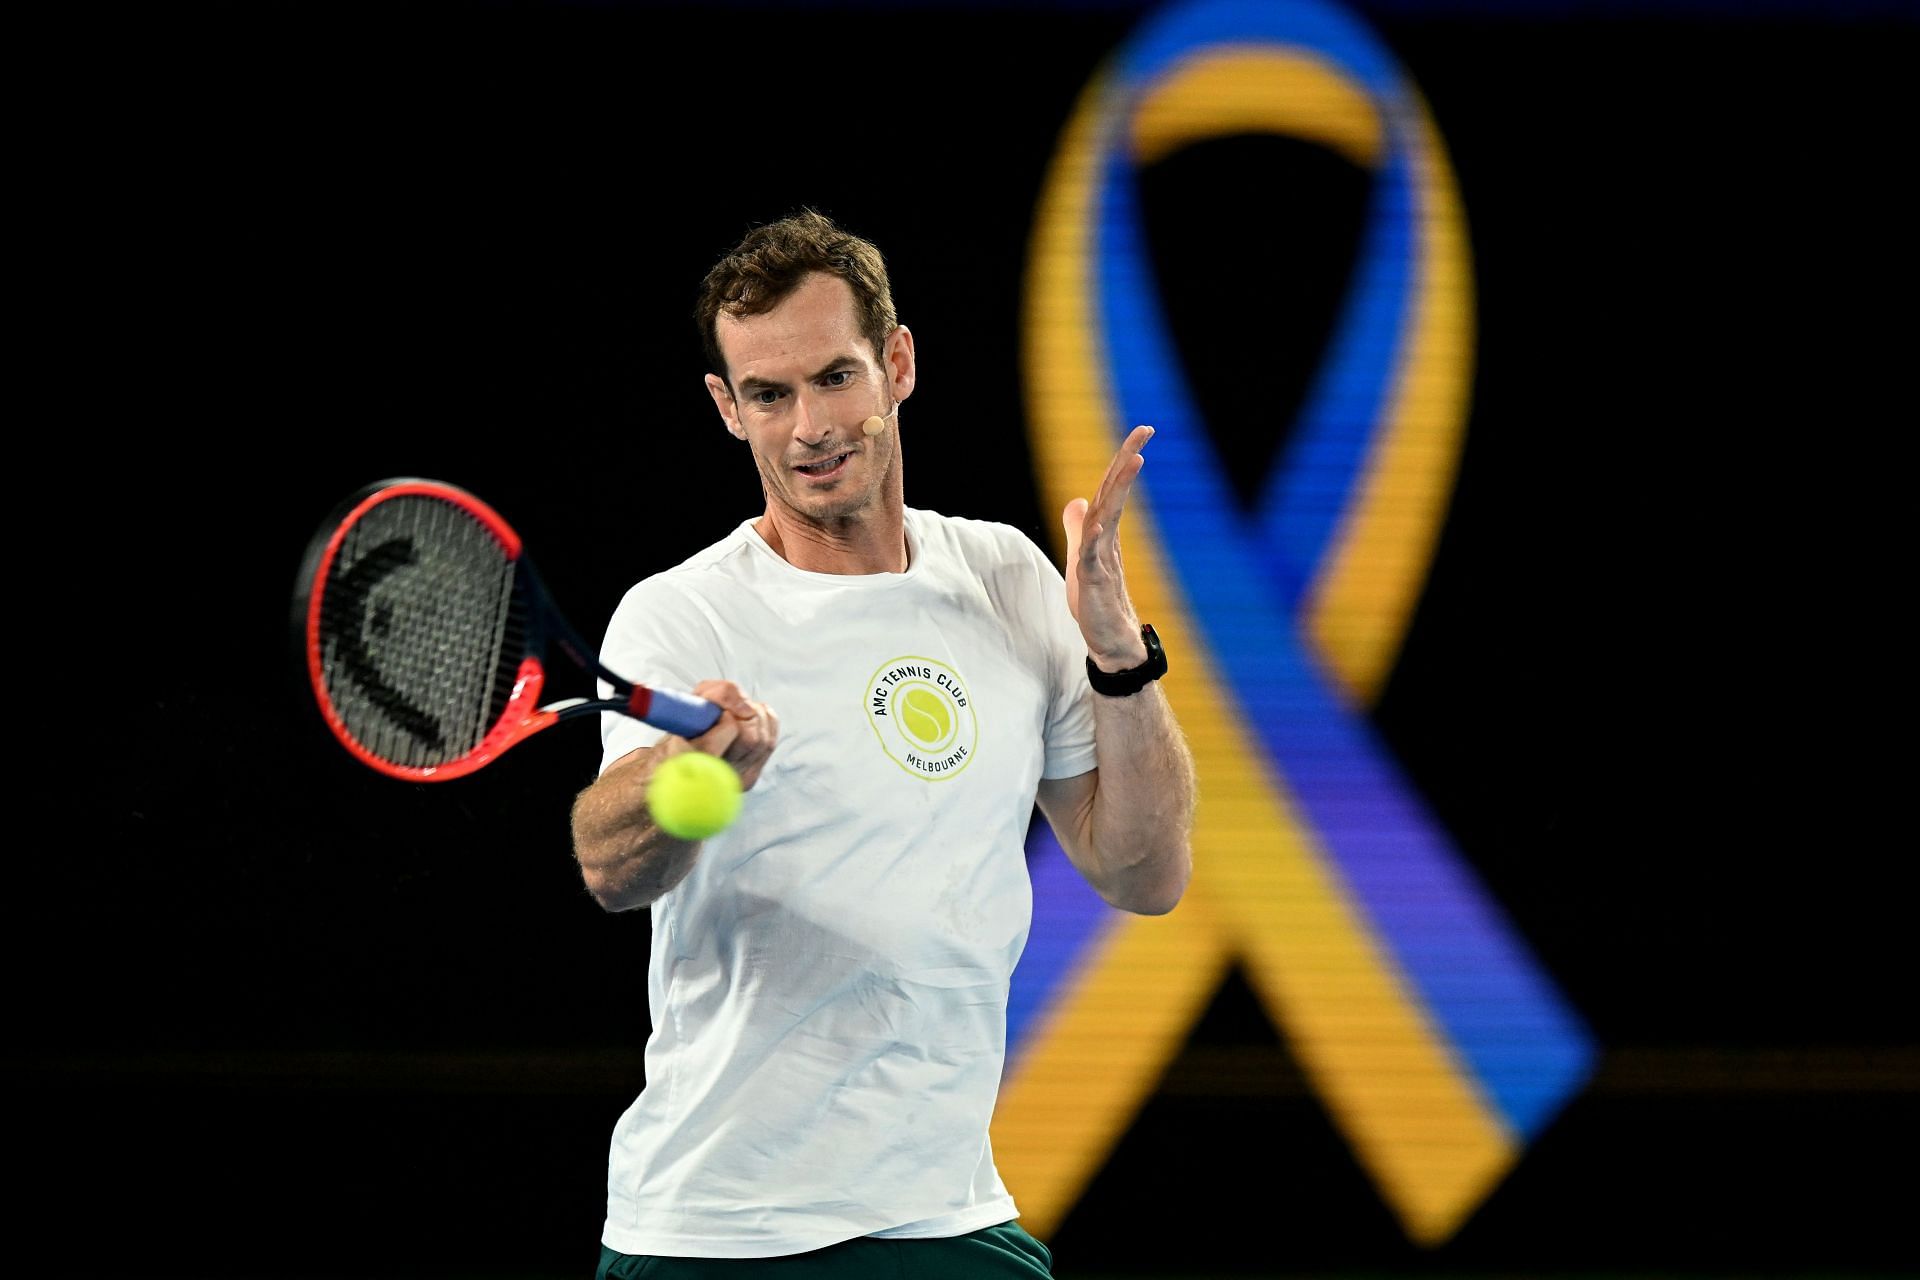 Andy Murray at the Tennis Plays for Peace event in Melbourne